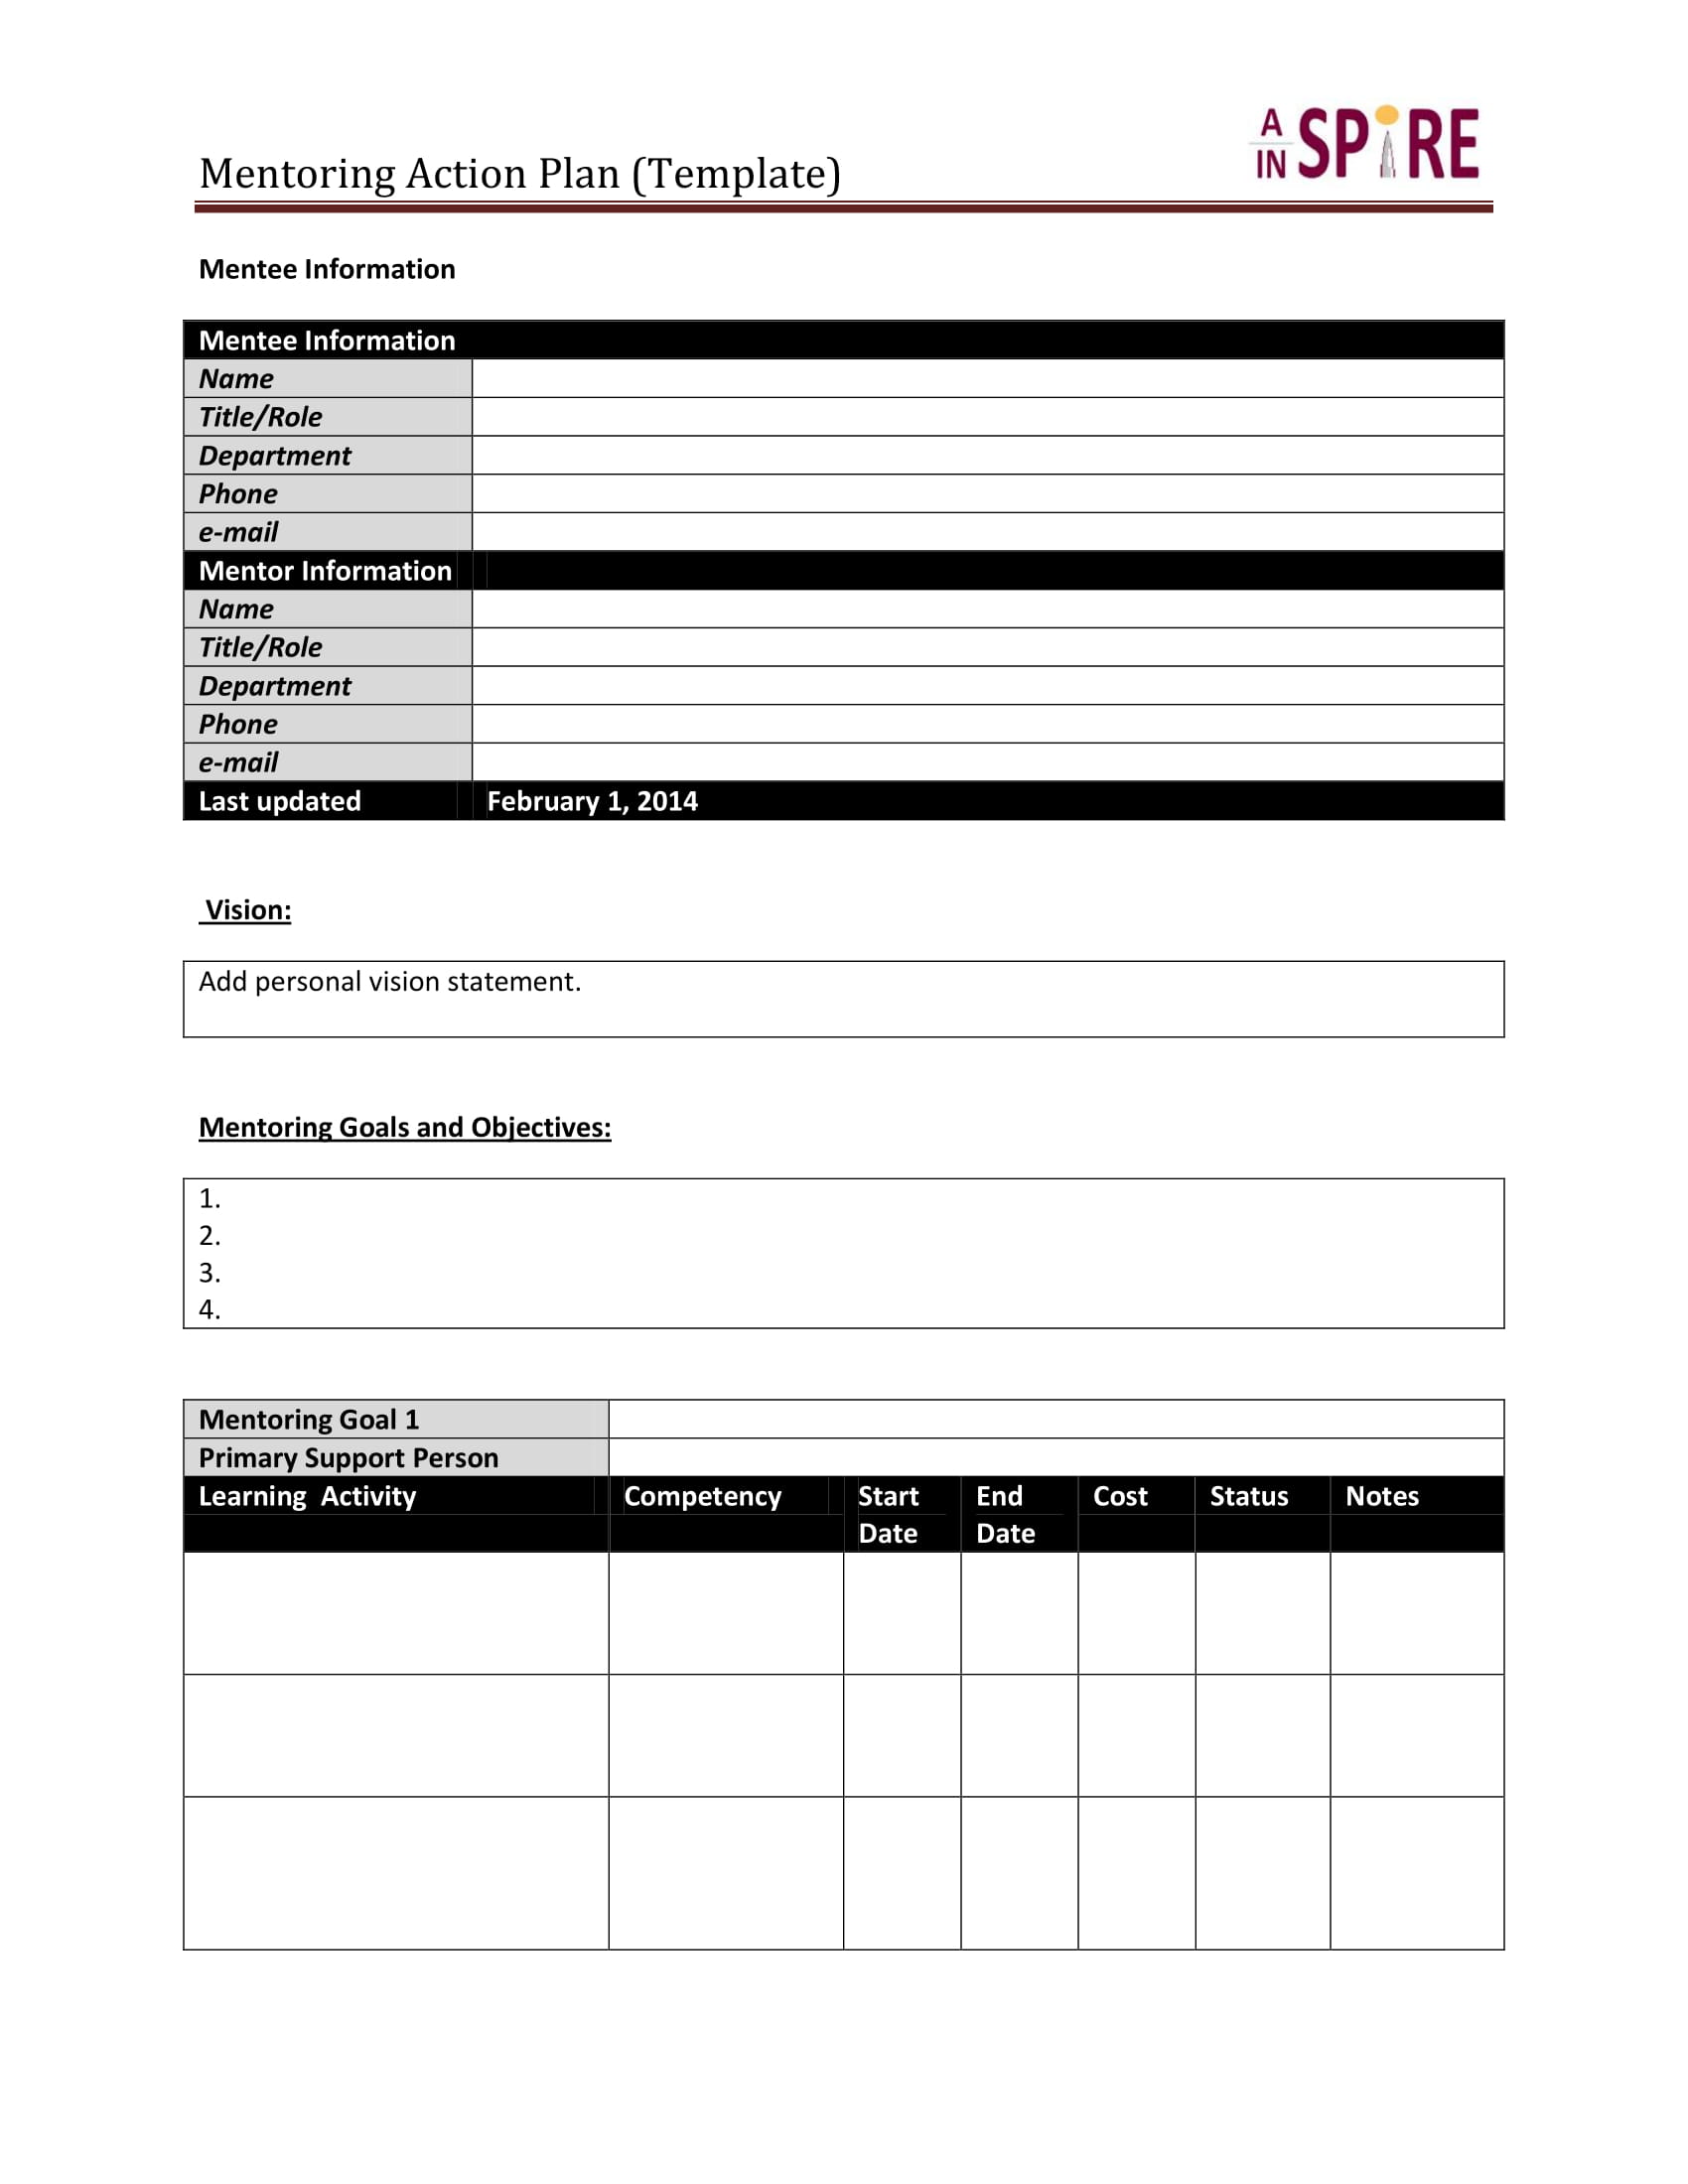 mentoring action plan template example 1